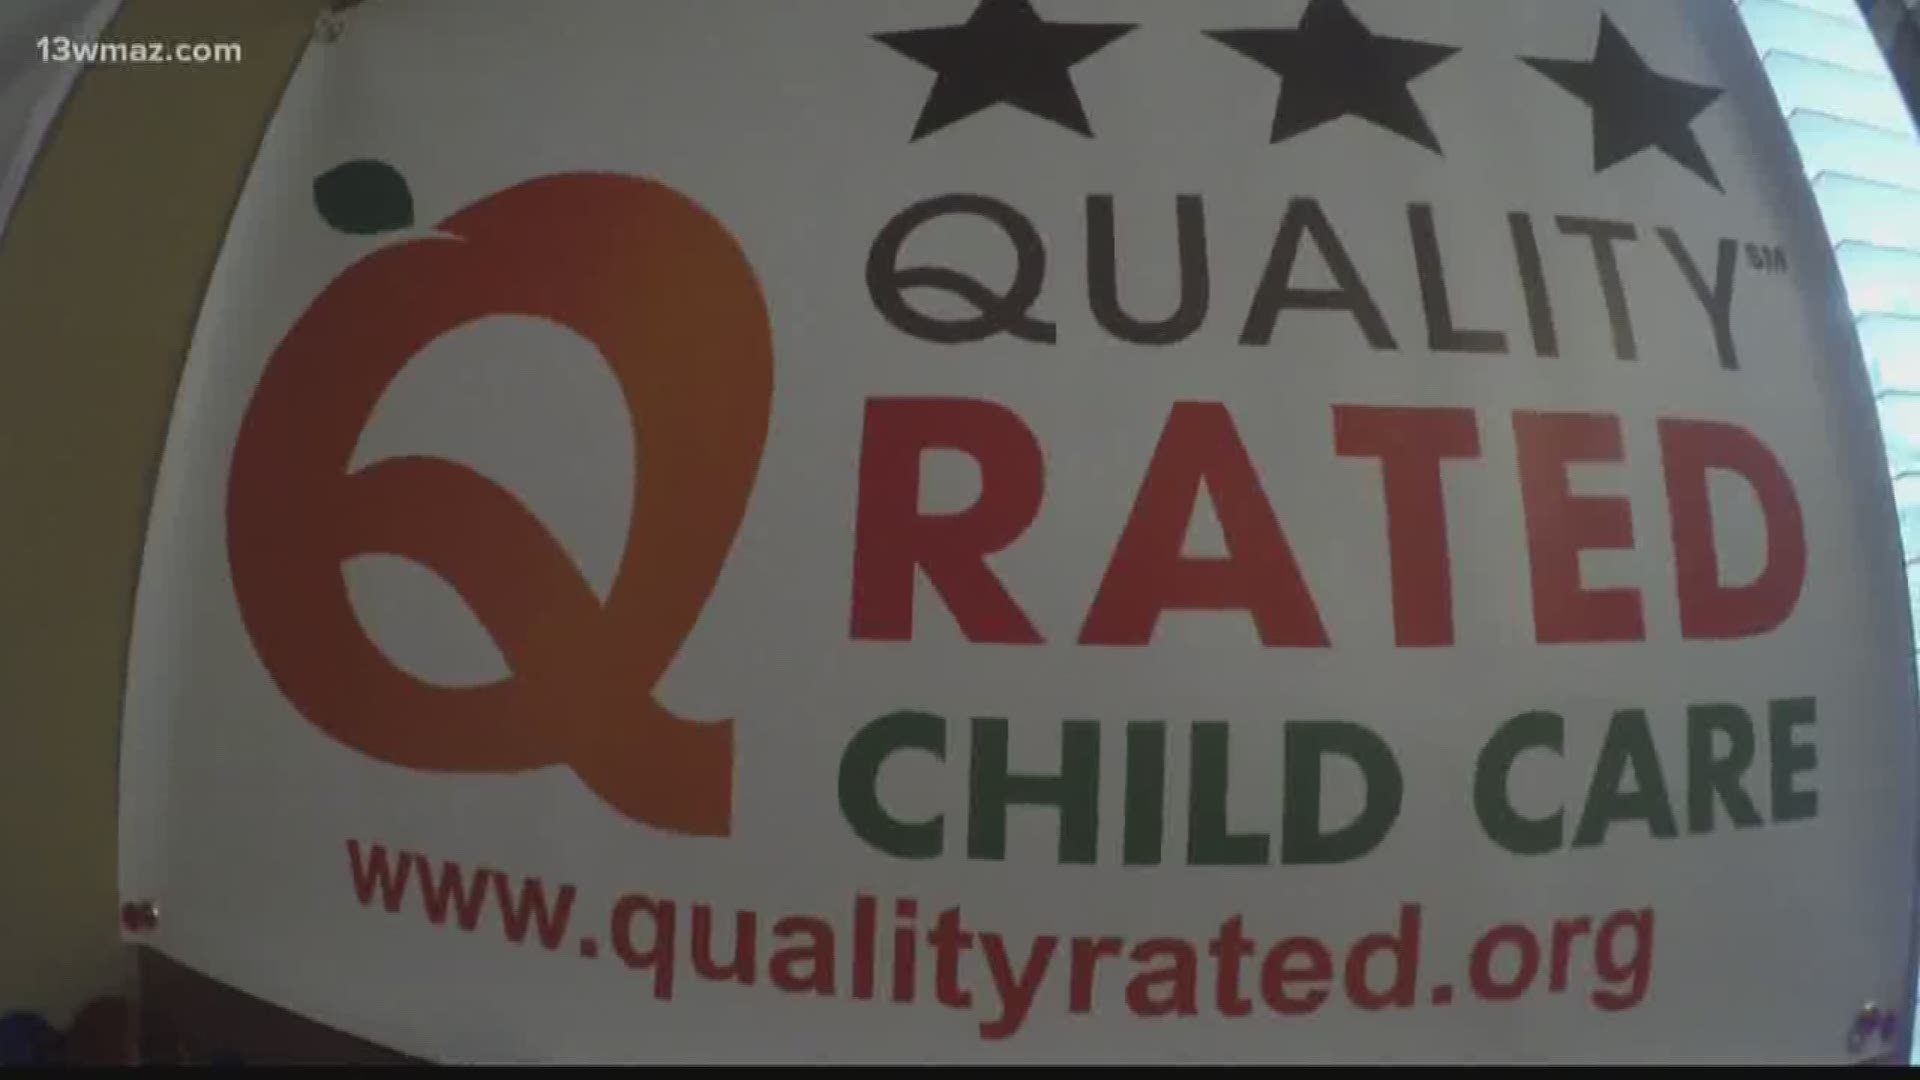 If you're looking for childcare options across Georgia, you may have noticed signs posted outside homes and daycares showing a quality rating. But what does it mean?